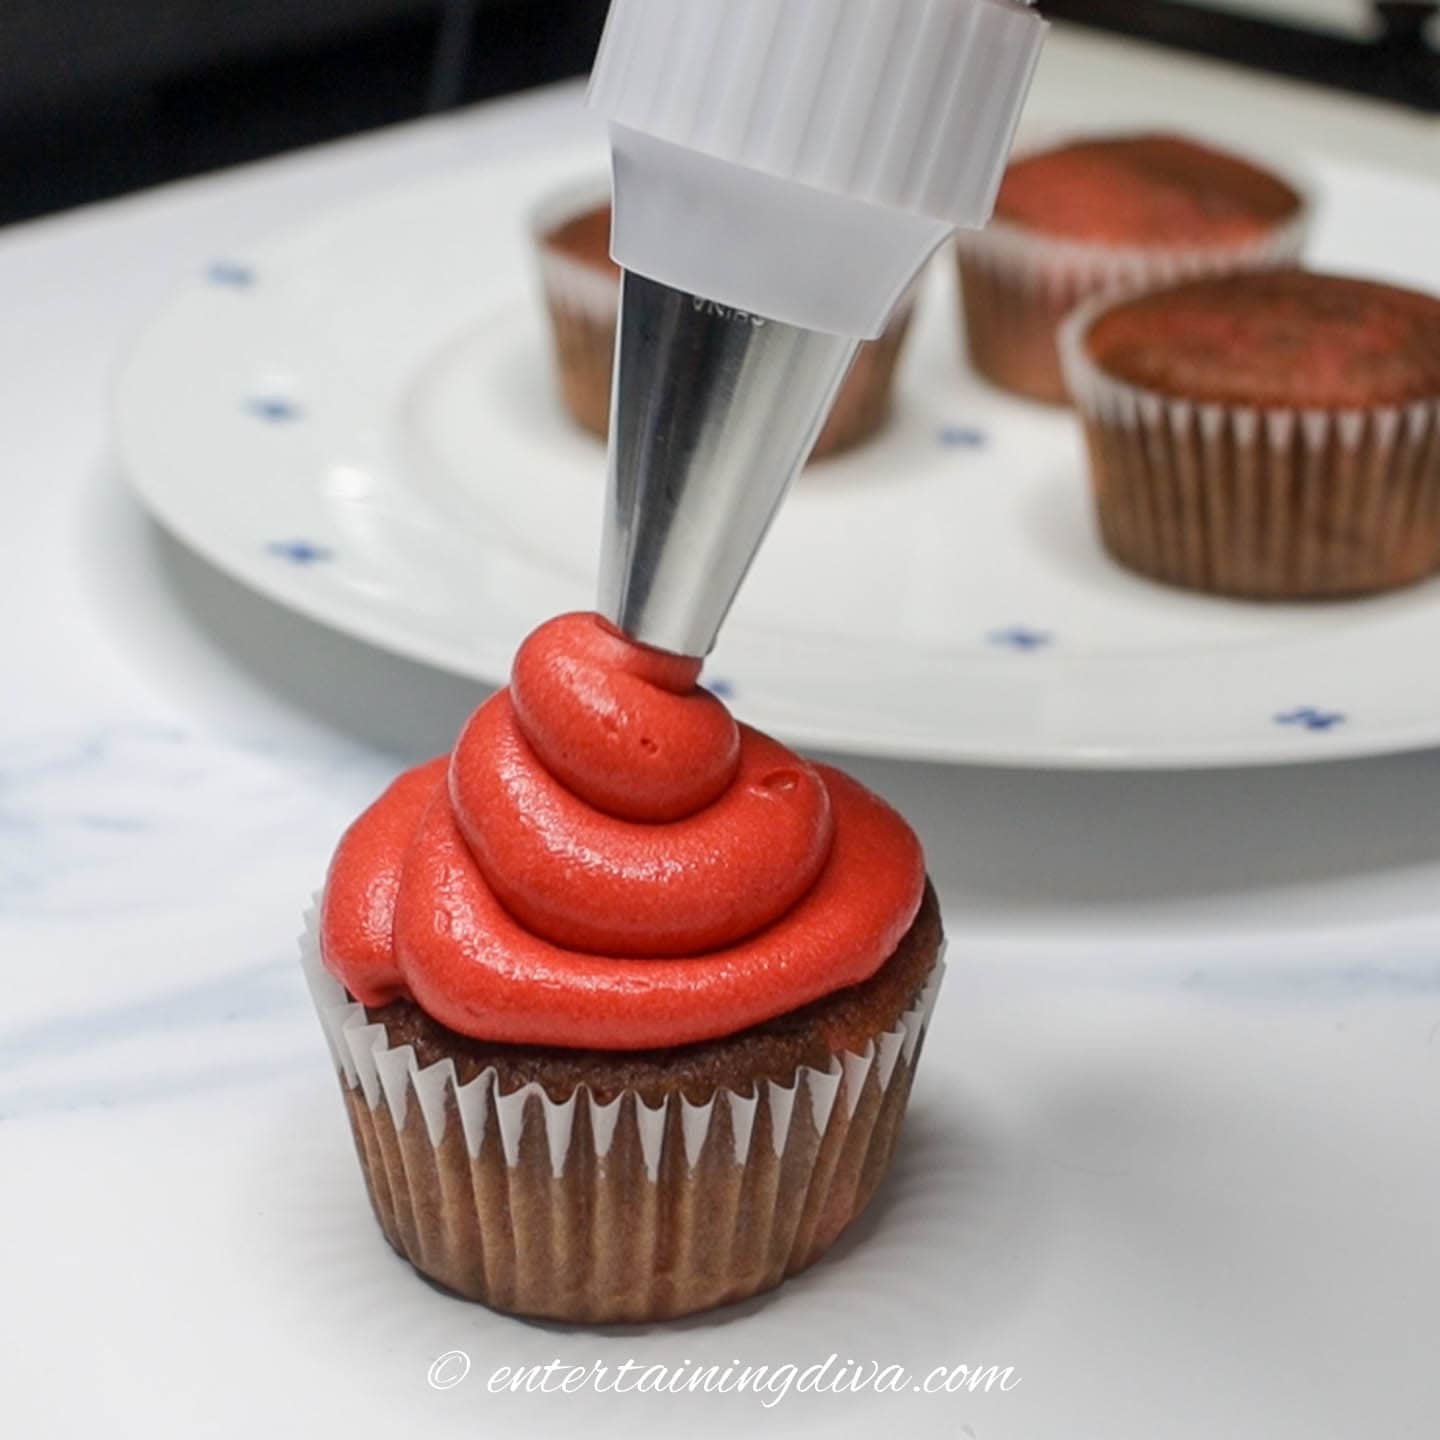 Red icing being piped onto a cupcake